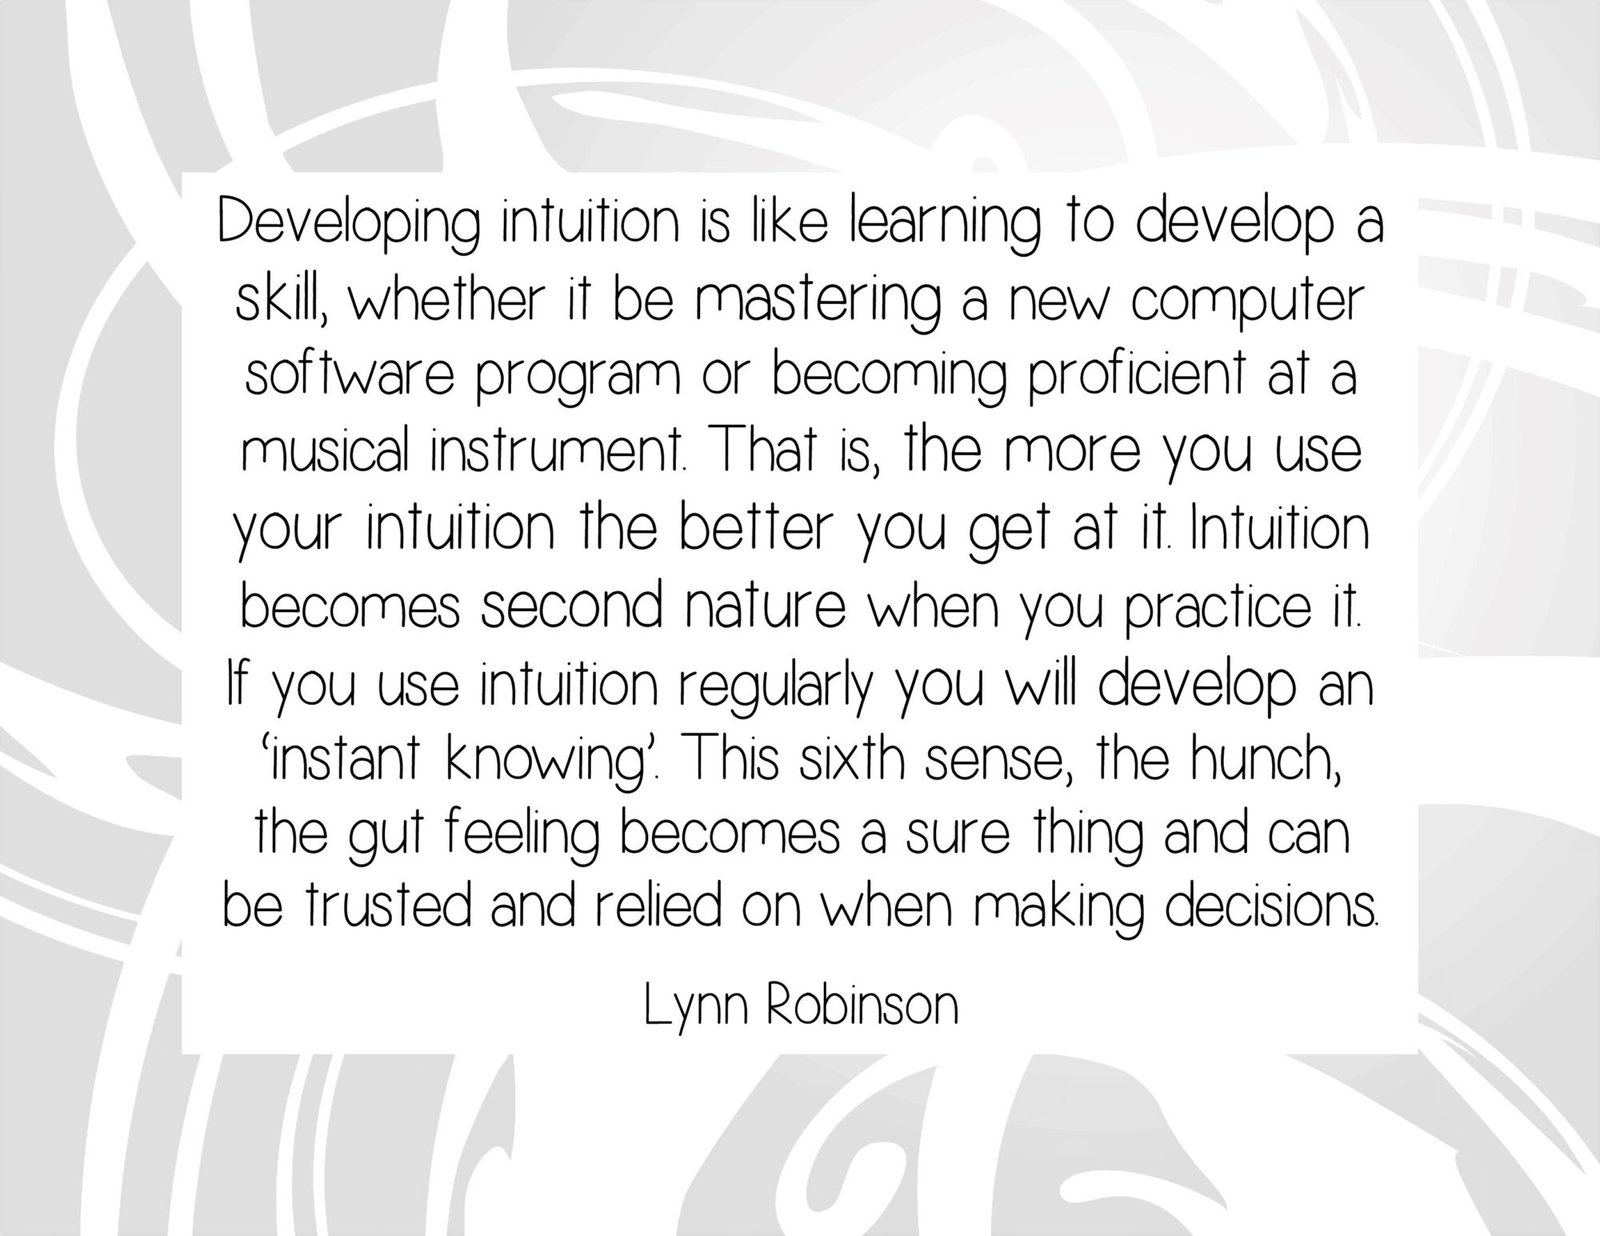 Developing Intuition is Like Learning to Develop